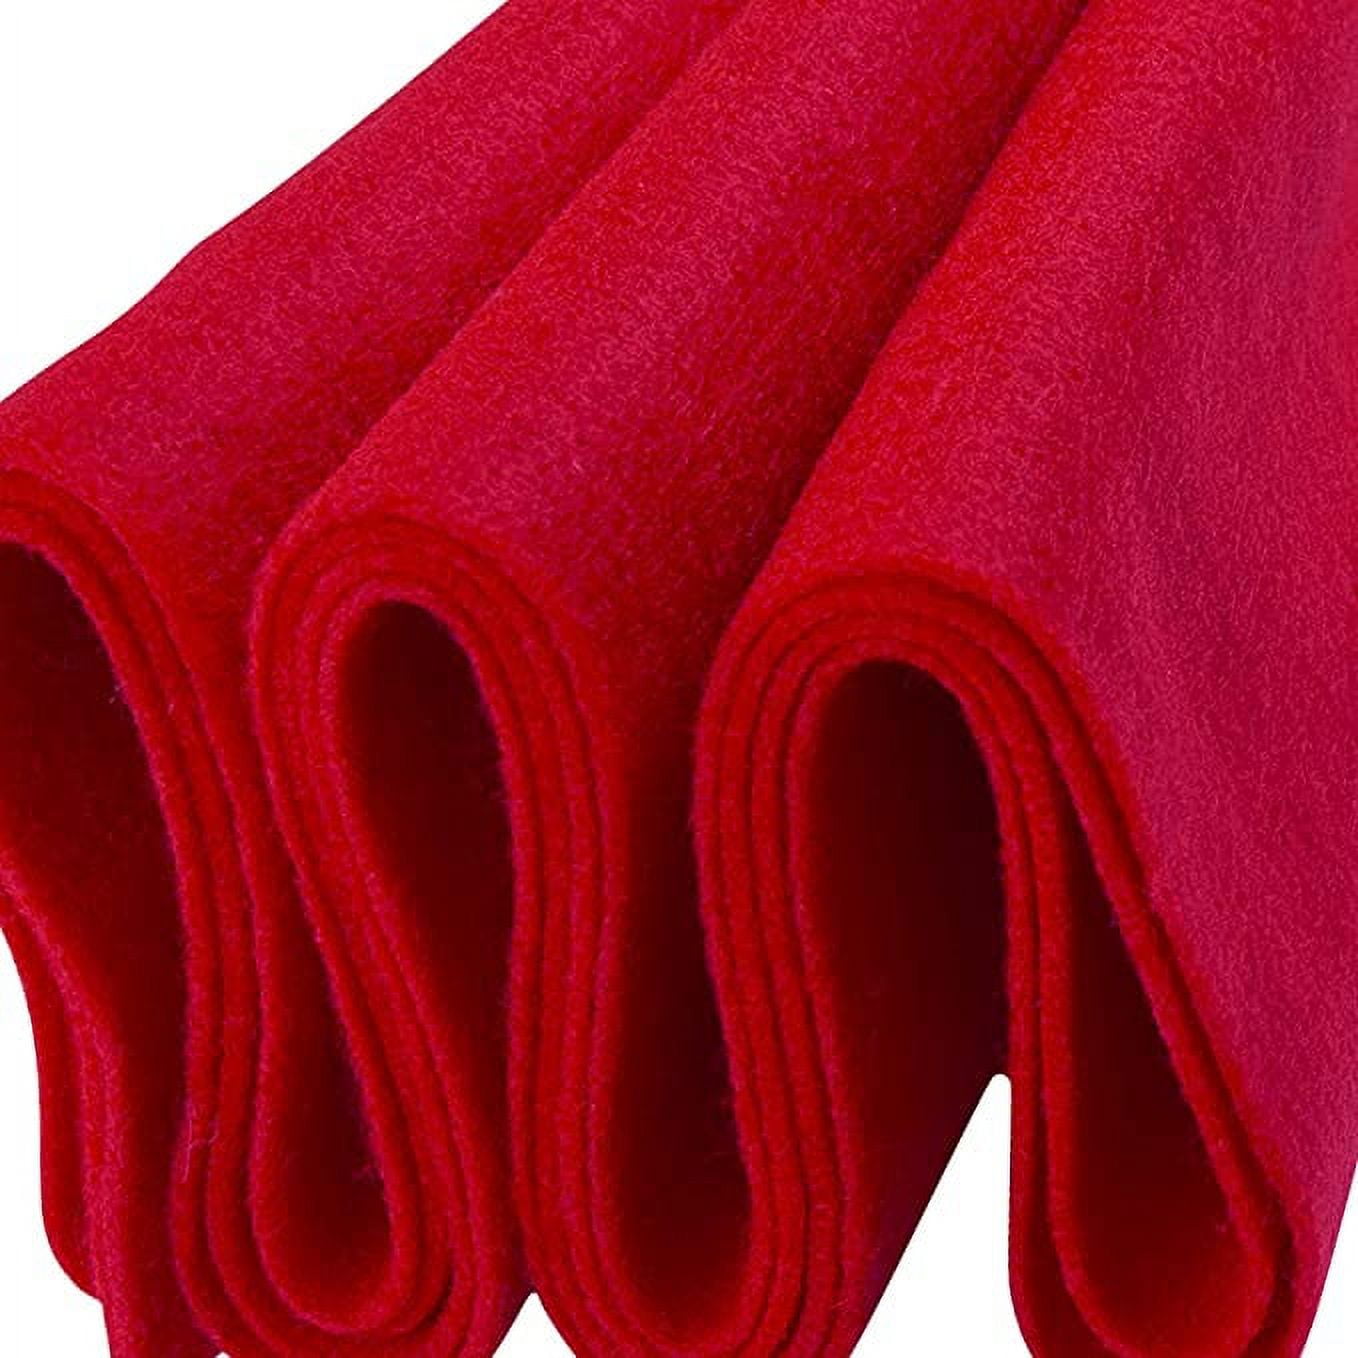 Threadart Premium Felt by The Yard - 36 Wide - Burgundy | Soft Wool-Like  Feel | 1.2mm Thick Fabric for DIY Crafts, Sewing, Crafting Projects 